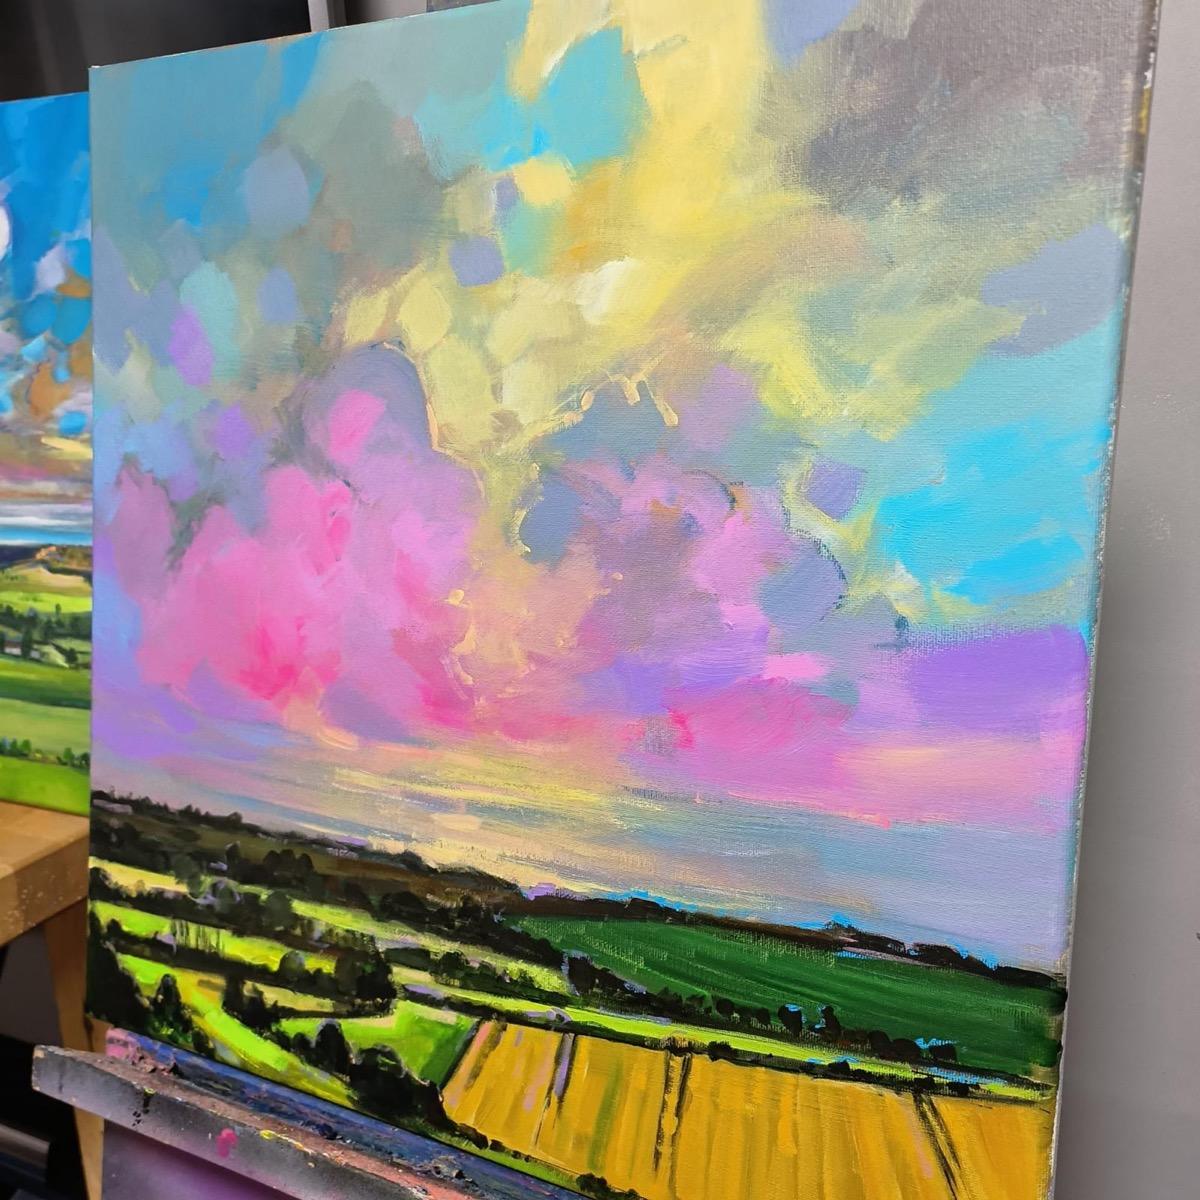 Original painting by Kris McKinnon. A landscape in the Cotswolds showing fields under a sunset of blue and magenta pastels.

ADDITIONAL INFORMATION:
Chadlington in the Summer, Cotswolds Landscape by Kris McKinnon [2024]
Original painting
Acrylic on